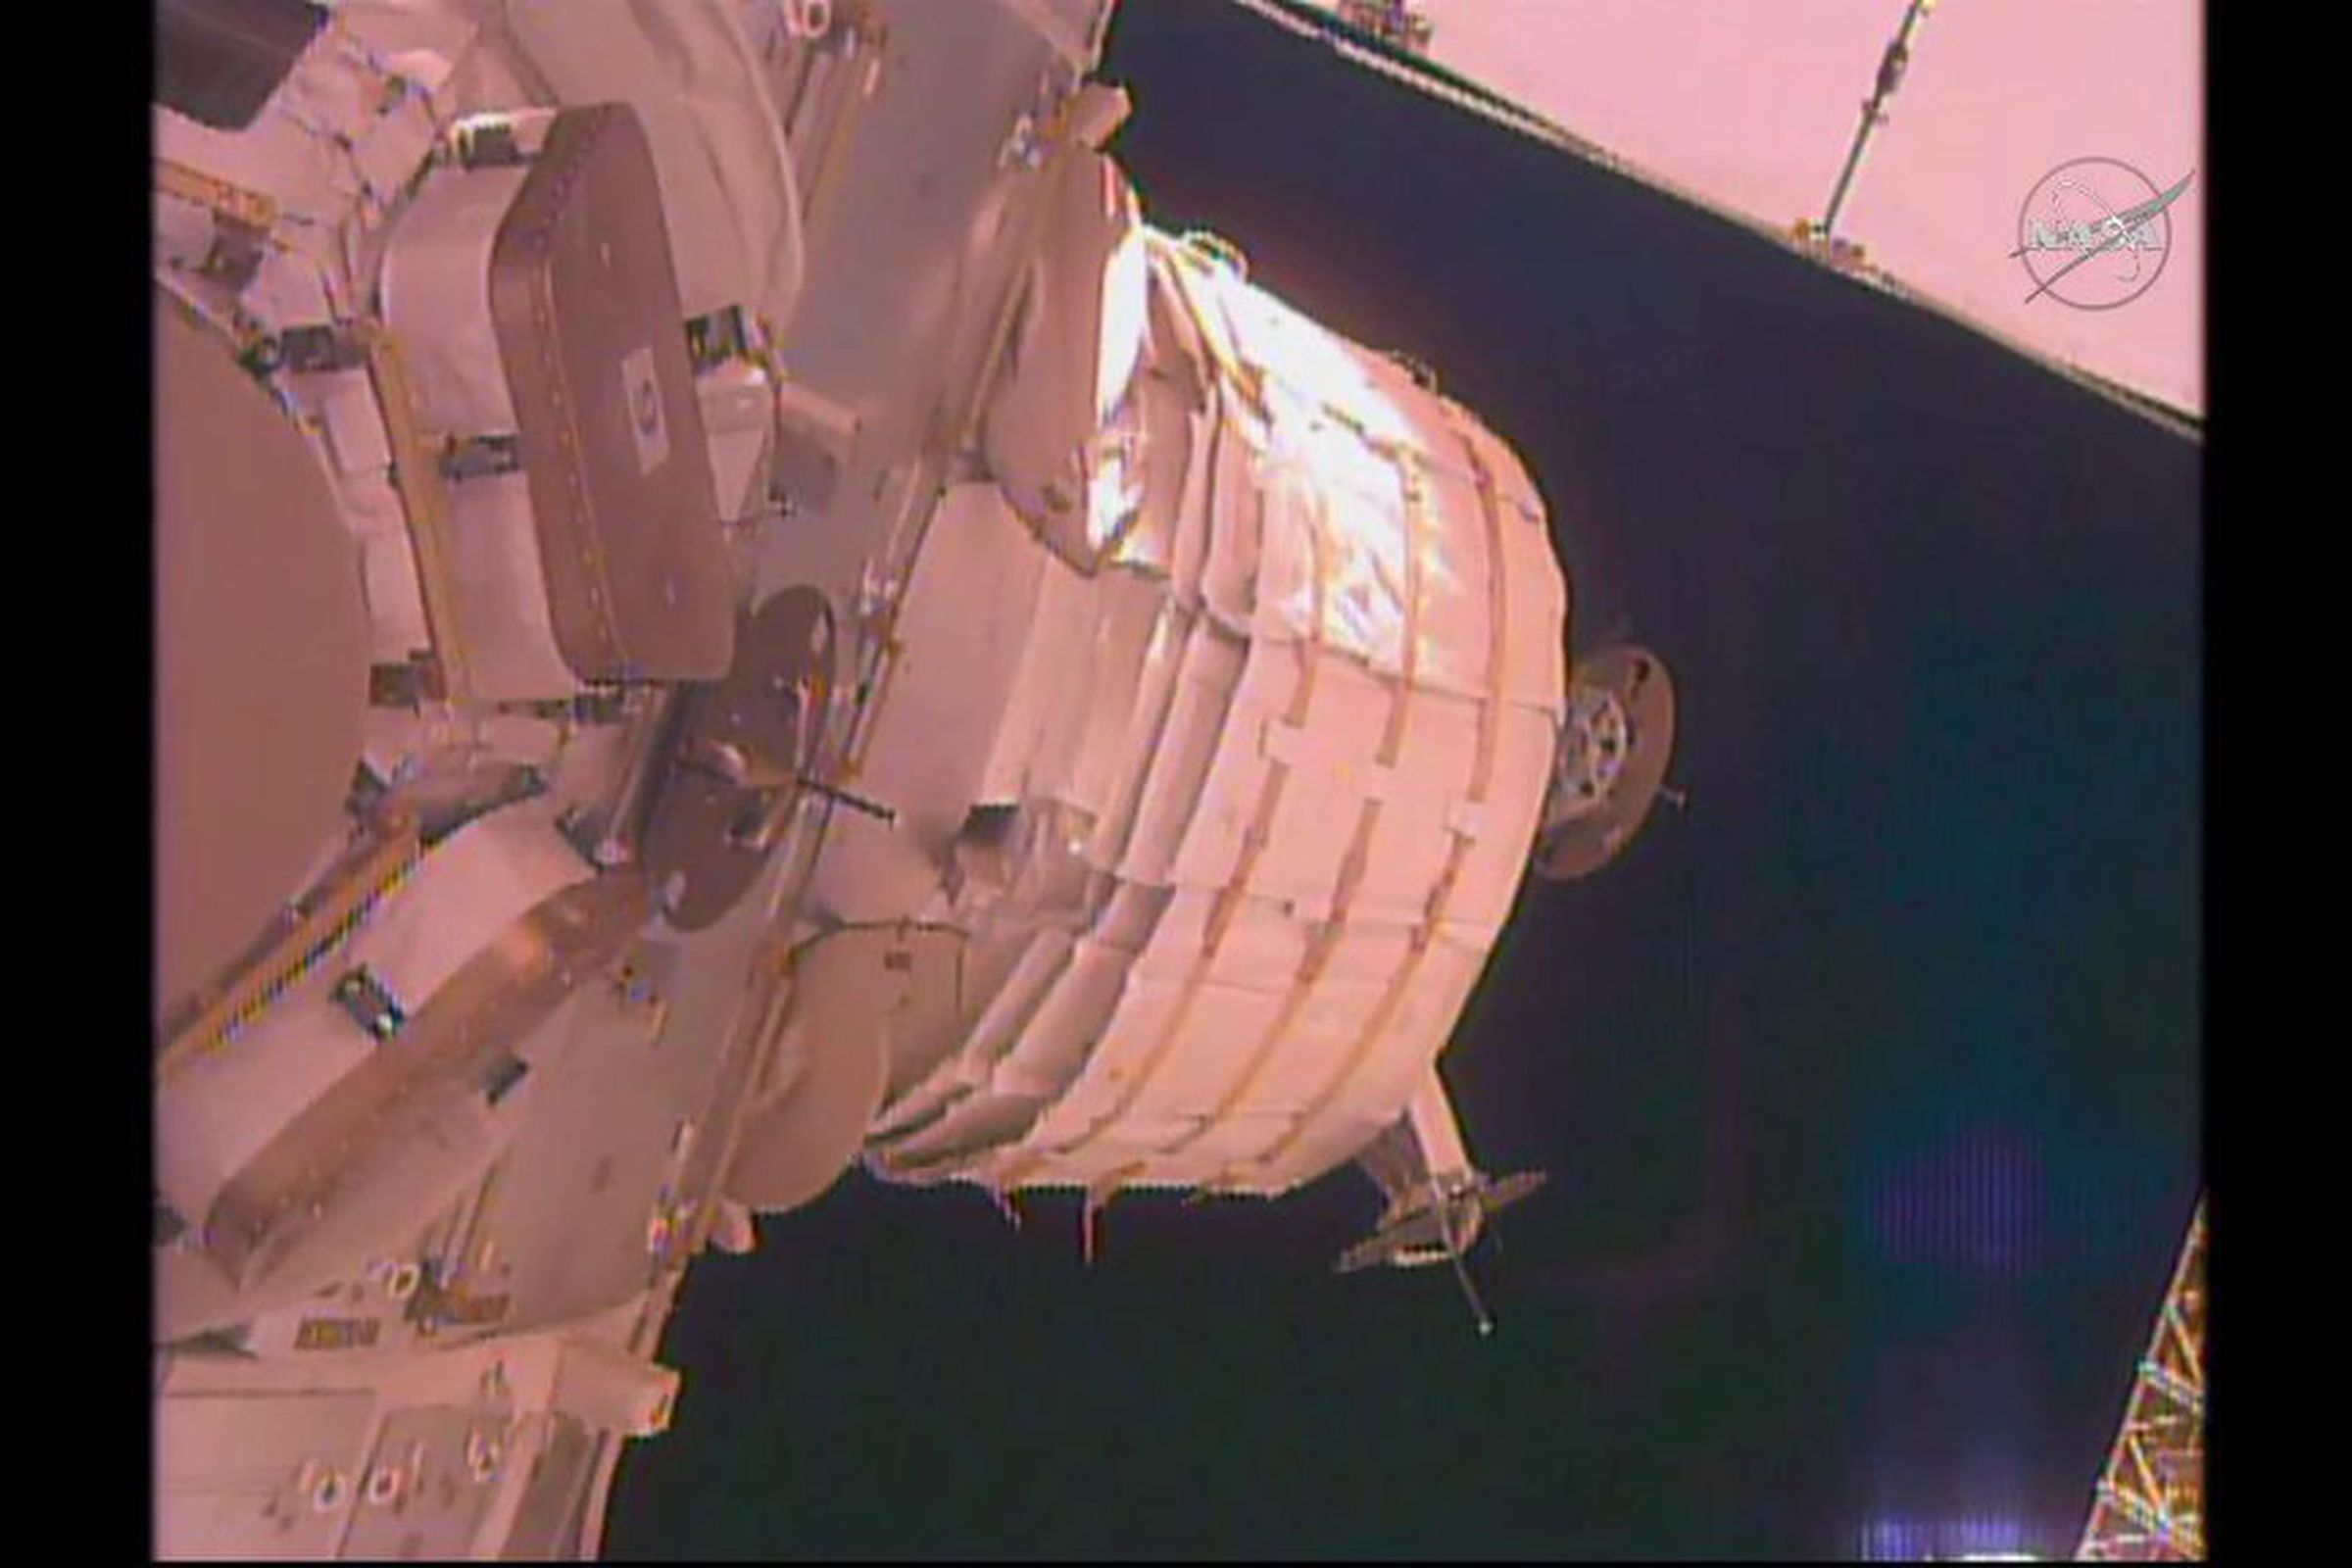 The unexpanded BEAM is seen attached to the Tranquility module.